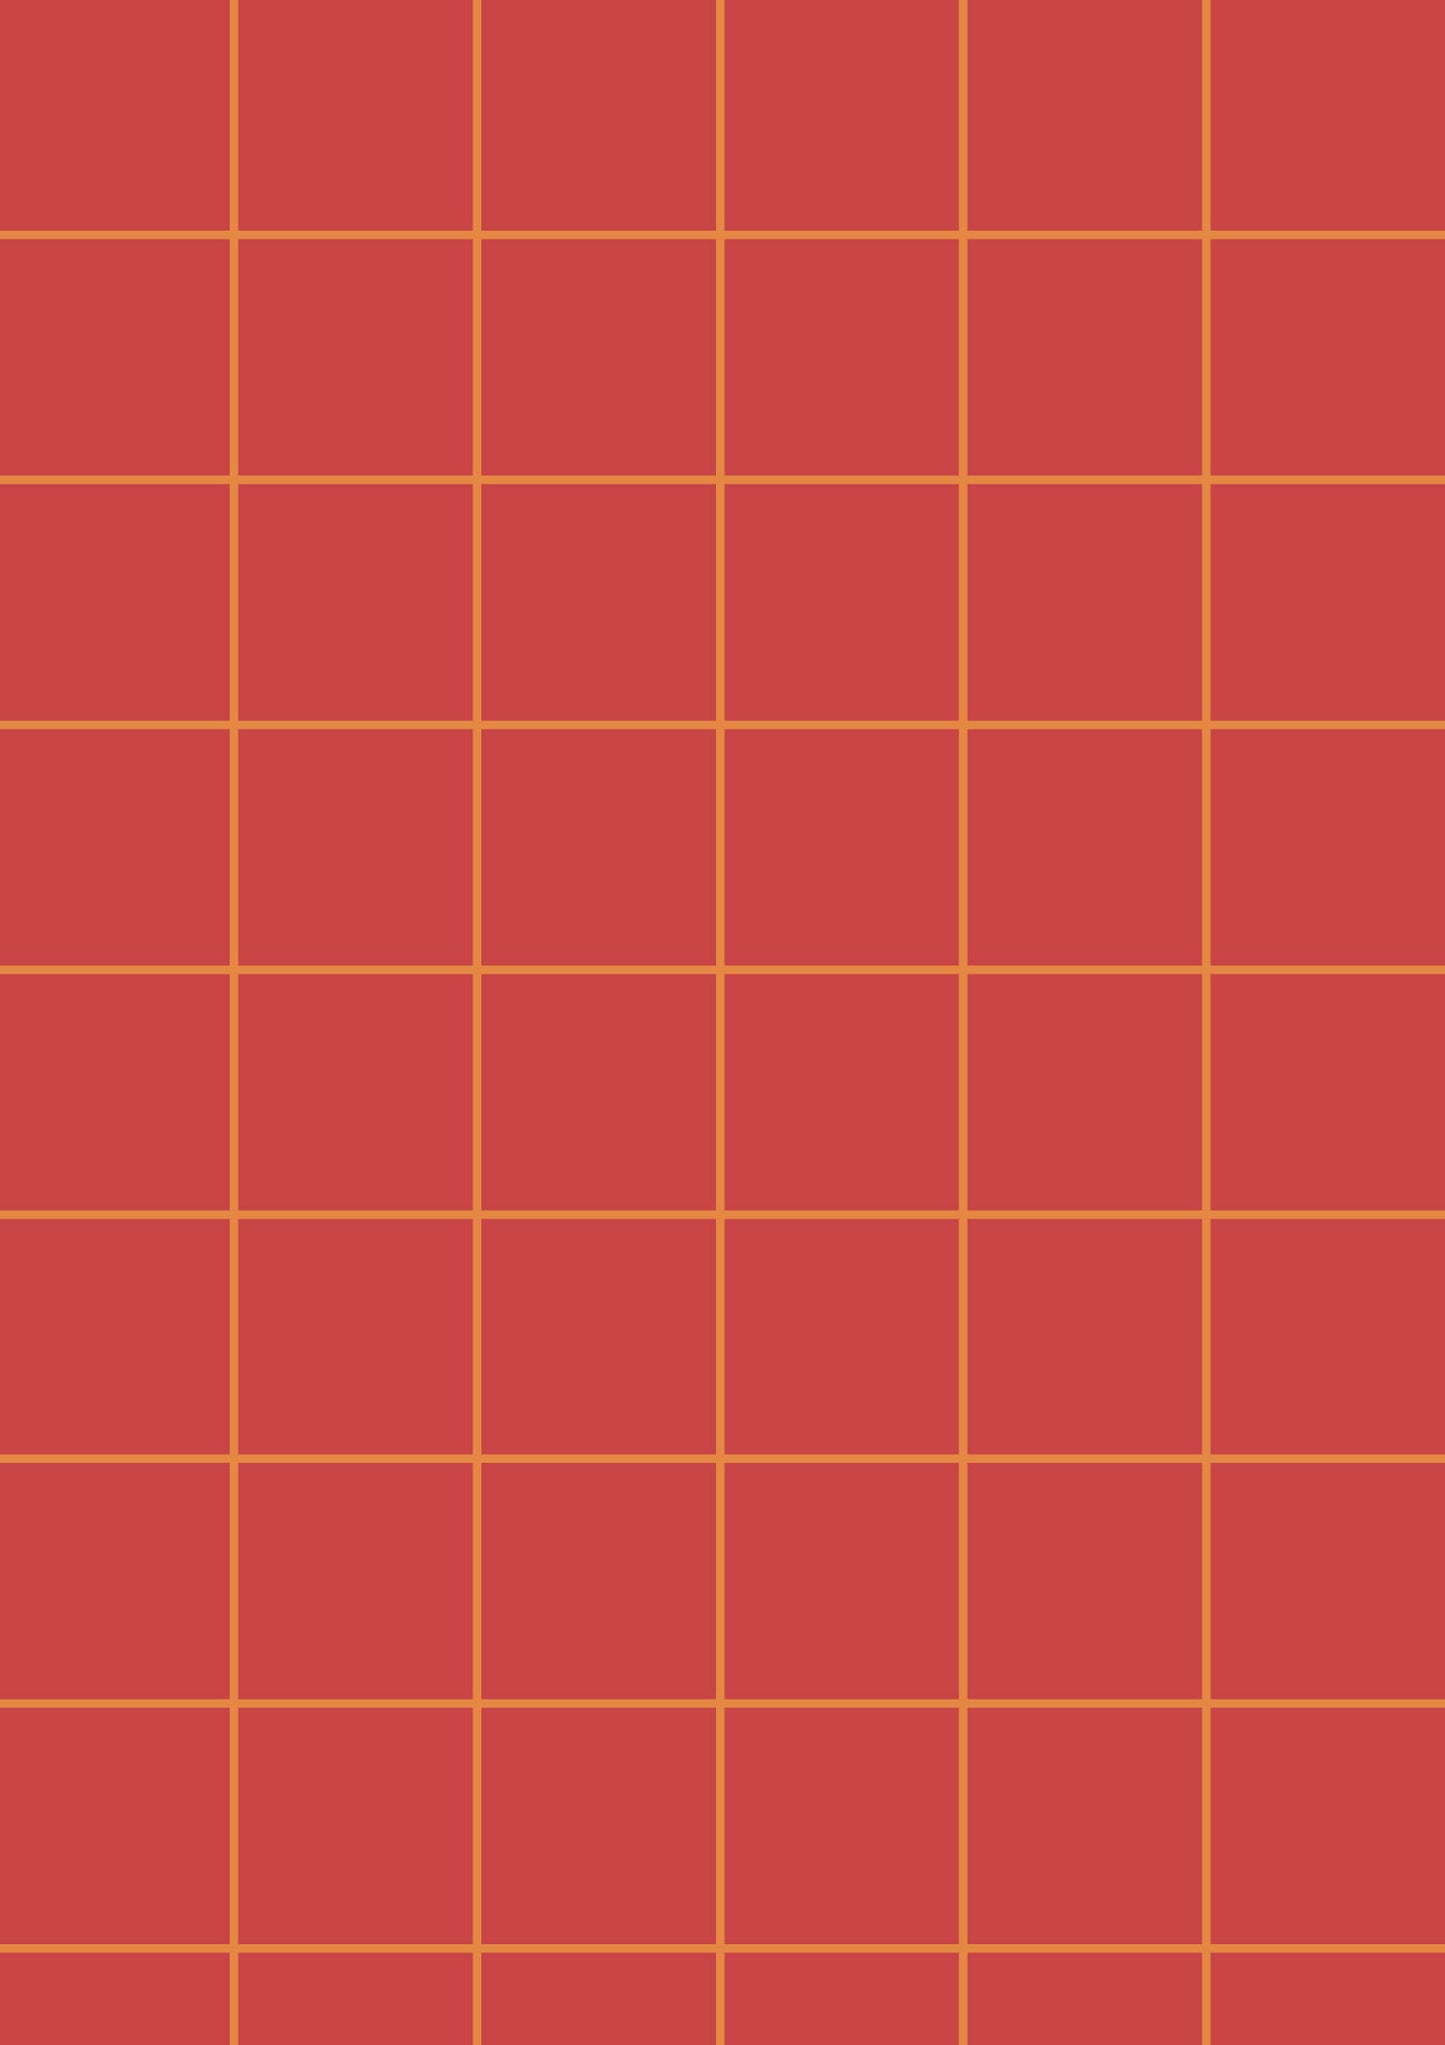 Red A1 Photography Backdrop with Orange Grid